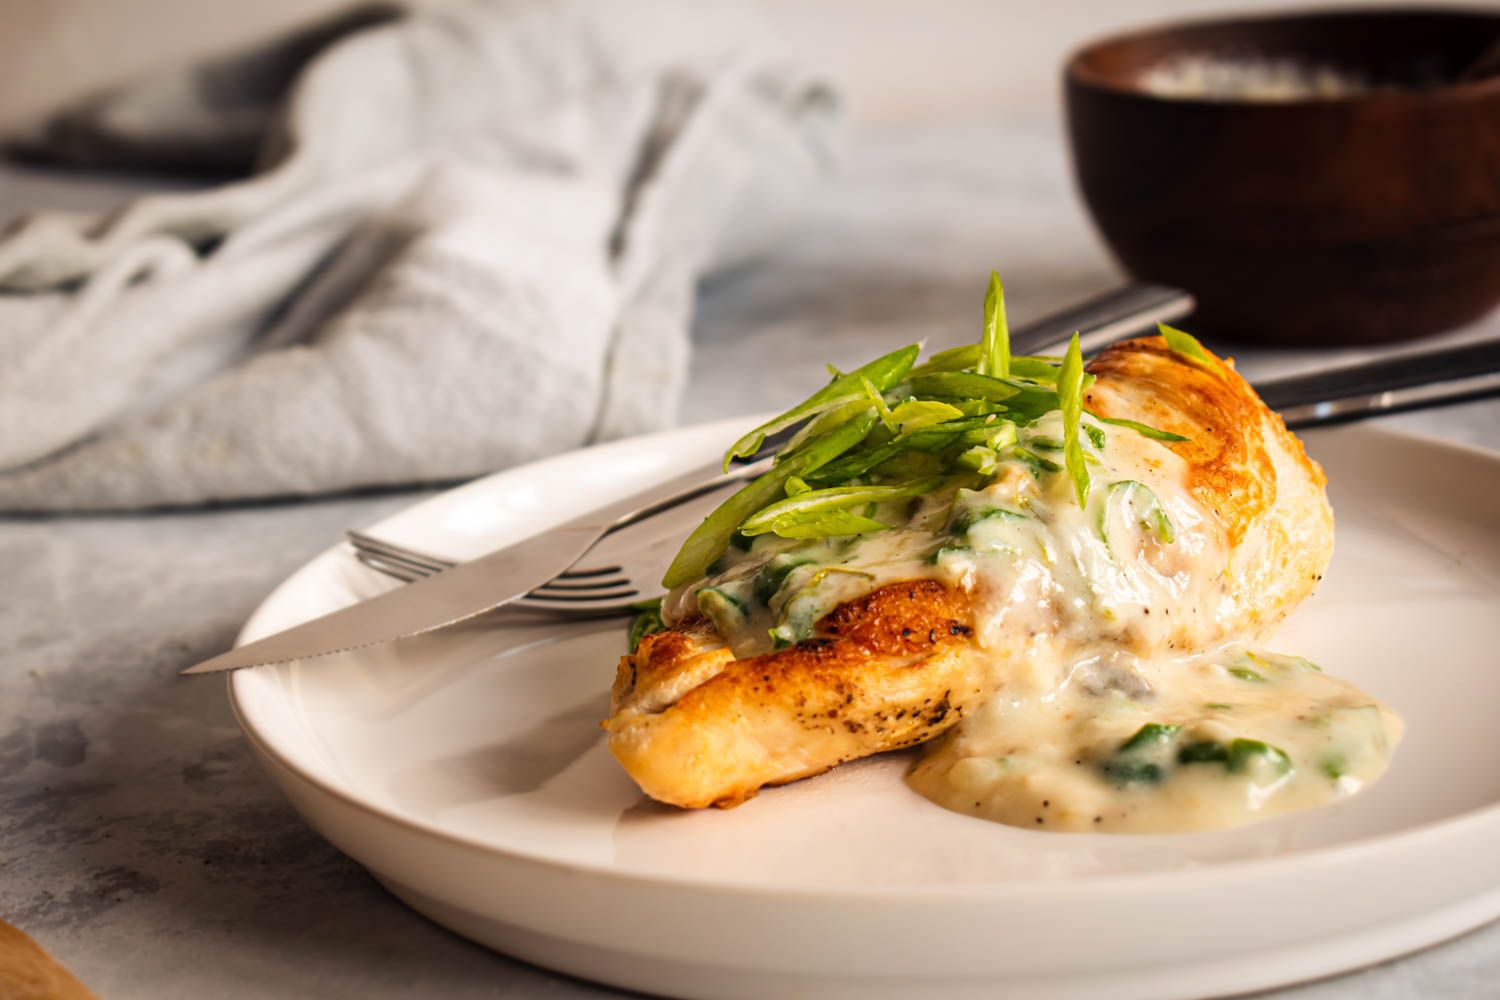 Chicken breast with a crispy brown exterior topped with creamy jalapeno sauce and sliced green onions.